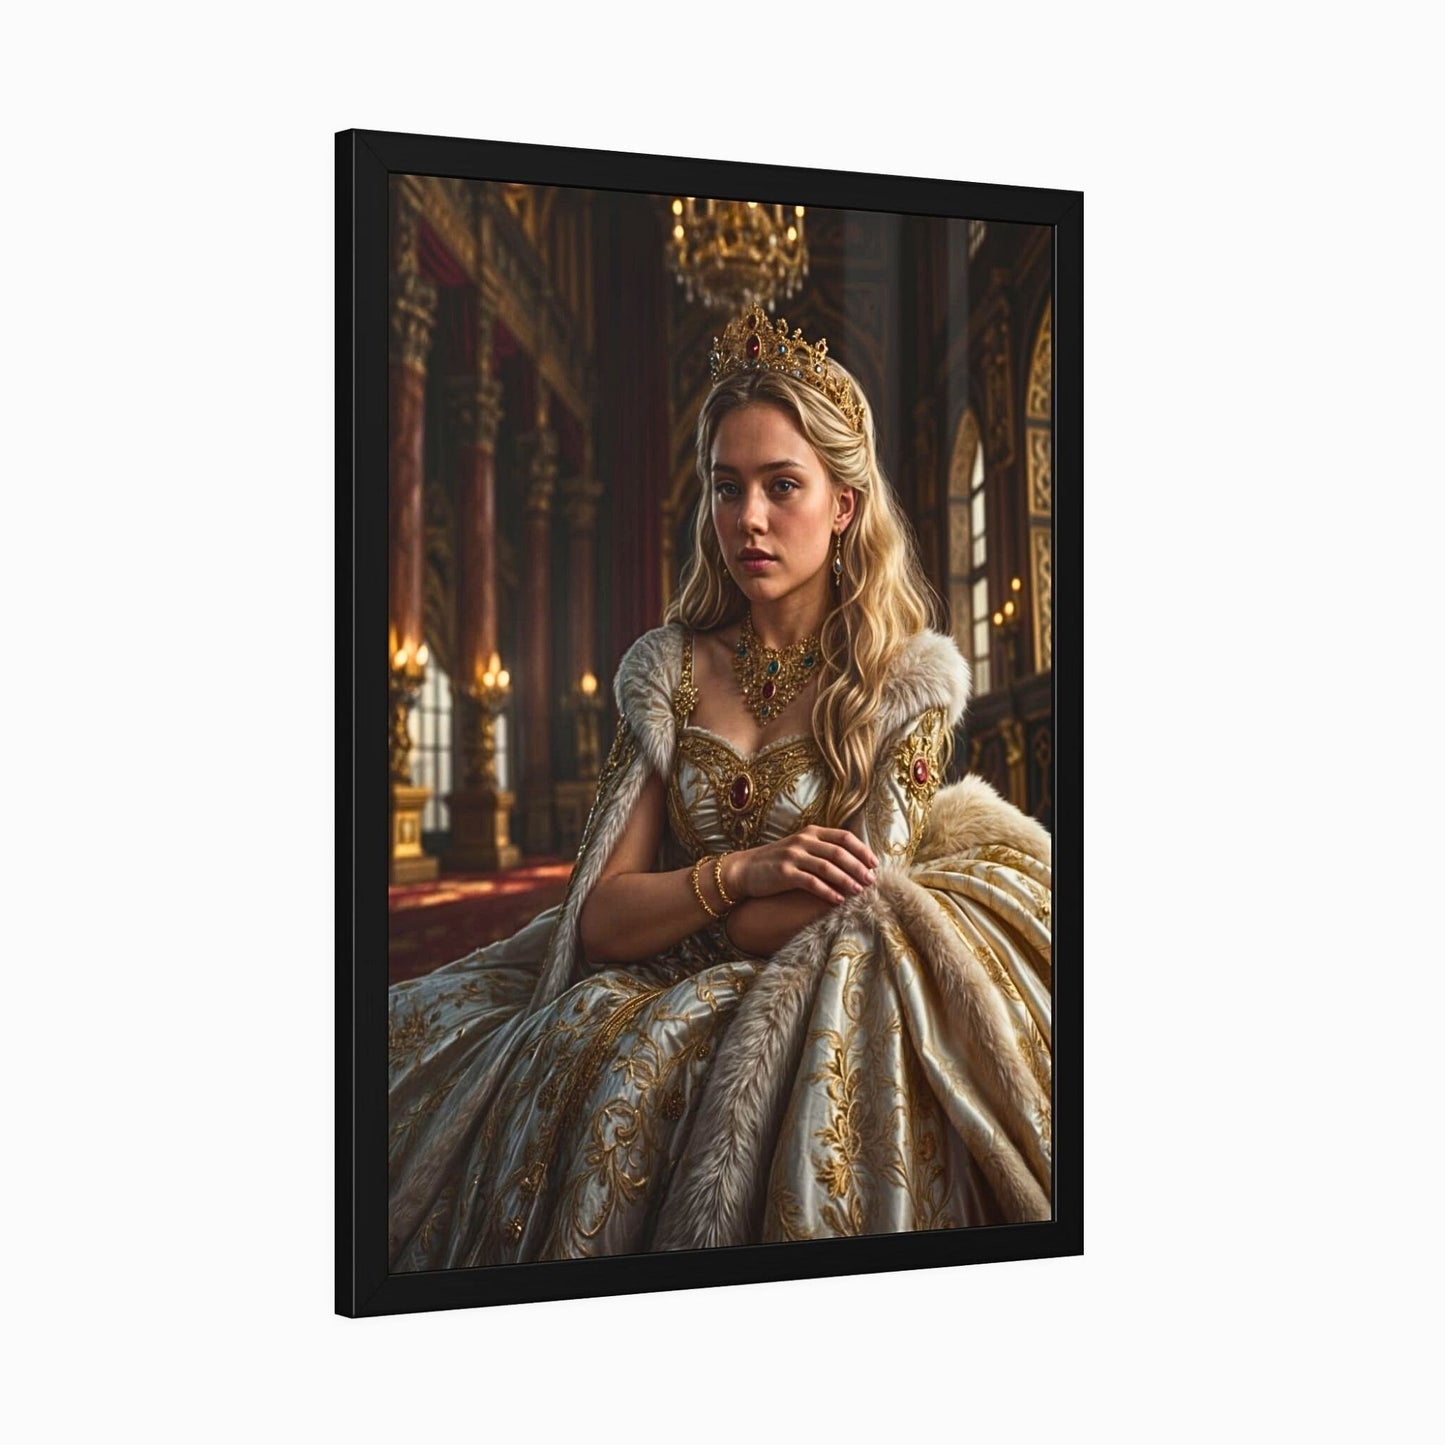 Looking for a unique gift? Get a custom royal portrait from your picture! Perfect for birthdays or as a personalized queen portrait. This Renaissance-style historical portrait makes a great gift for her, capturing the essence of royalty with a touch of humor. Ideal for any woman in your life, whether it's your mom, wife, or friend. Surprise them with this custom woman portrait today!